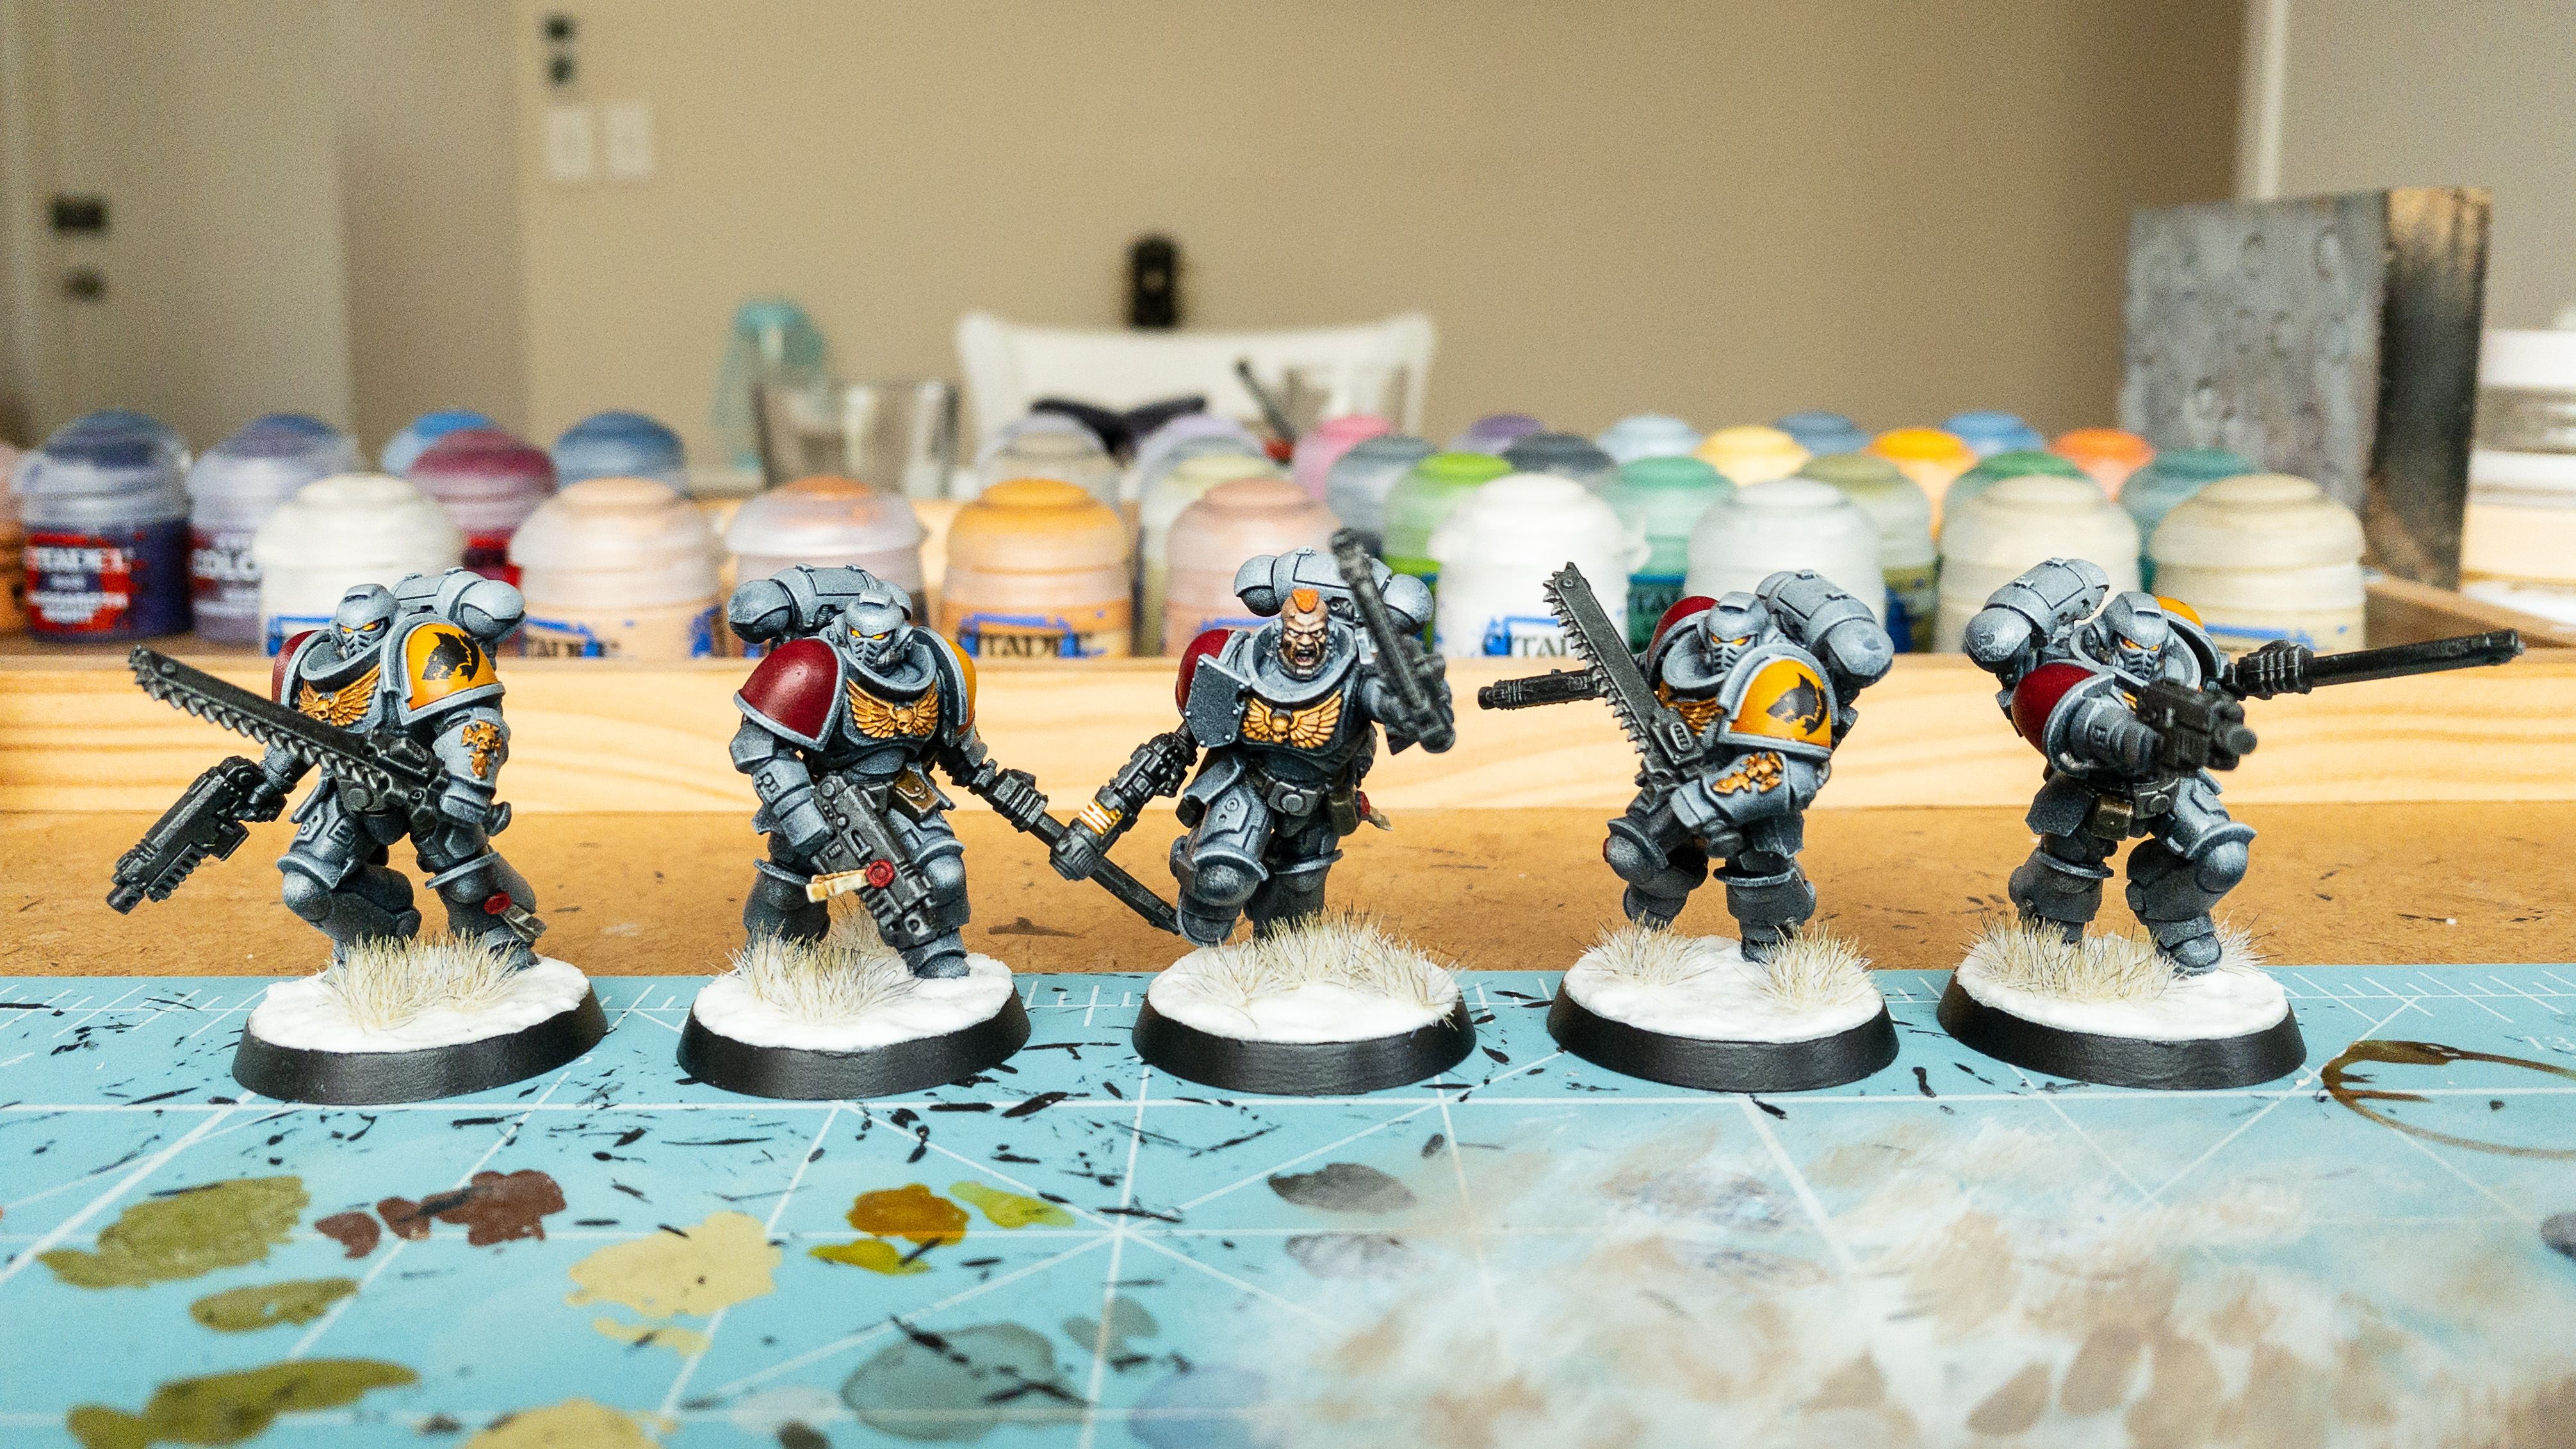 A photo of five Space Marines, heavily-armoured warriors all wielding pistols and chainswords. They're painted a blue/grey colour, one shoulder pad is a rich yellow and the other is a dark red. The sergeant in the middle has no helmet on and I was able to paint his pupils, and for the other four with helmets on, their eye slits go from red on the outside to yellow on the inside. They're on snowy bases and the bases have little wintery grass tufts on them.